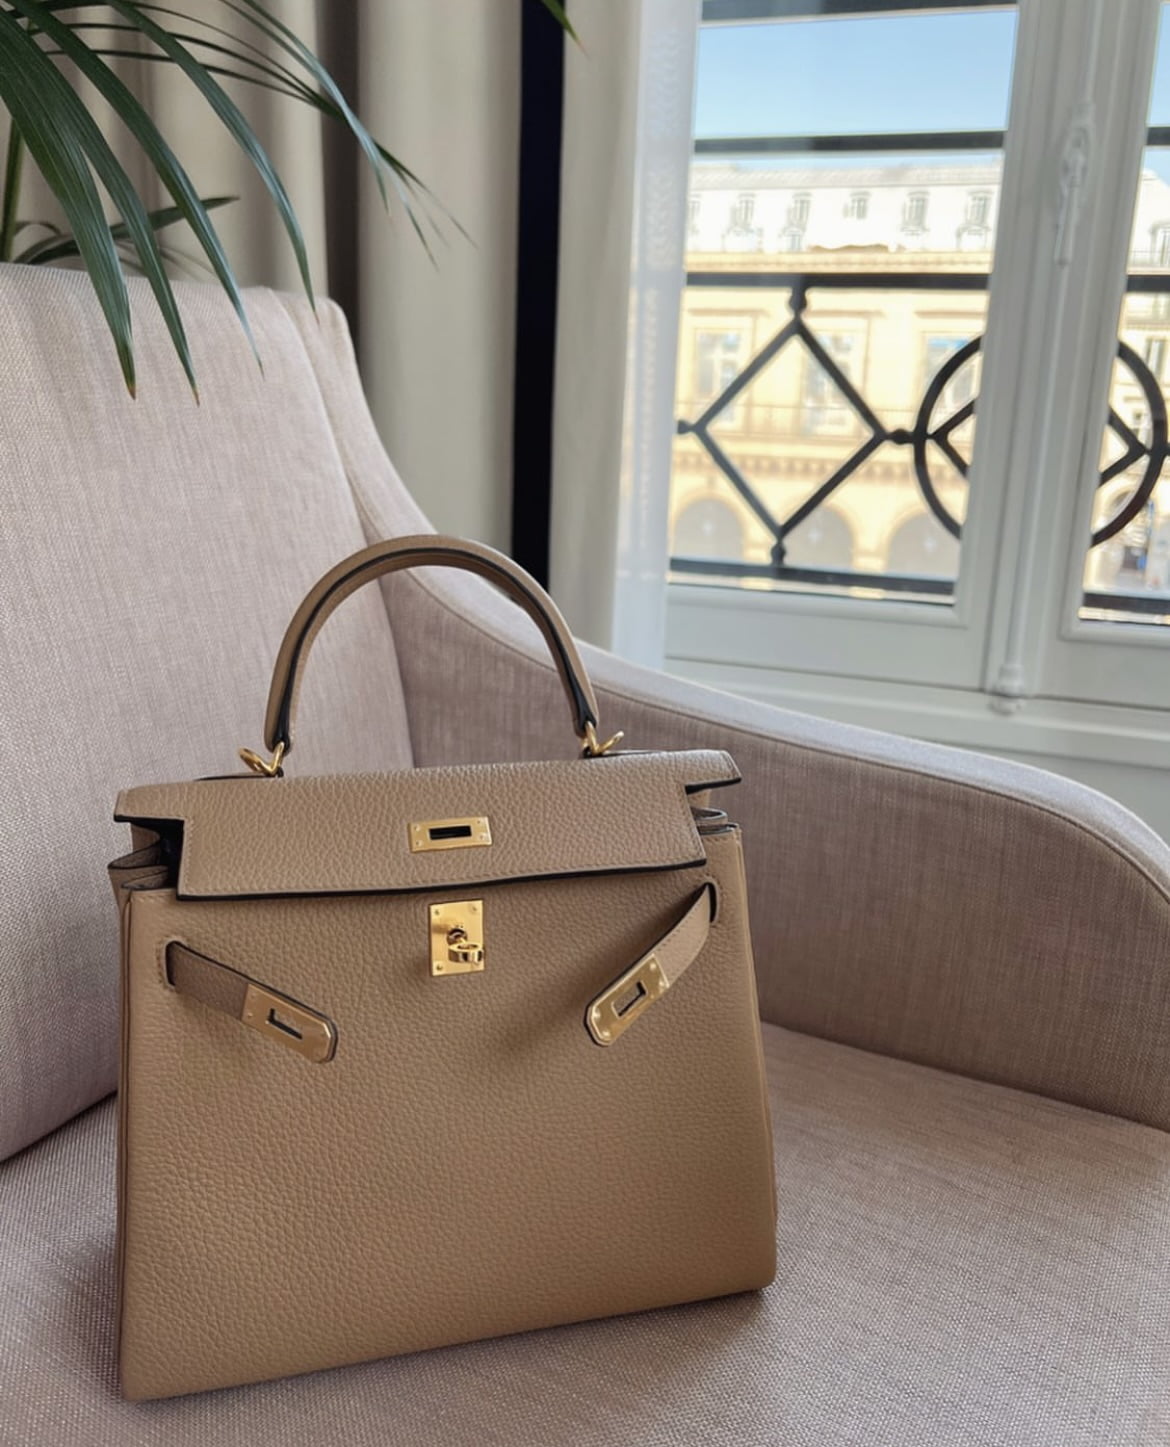 How Much Does a Birkin Cost in Paris? - PurseBop